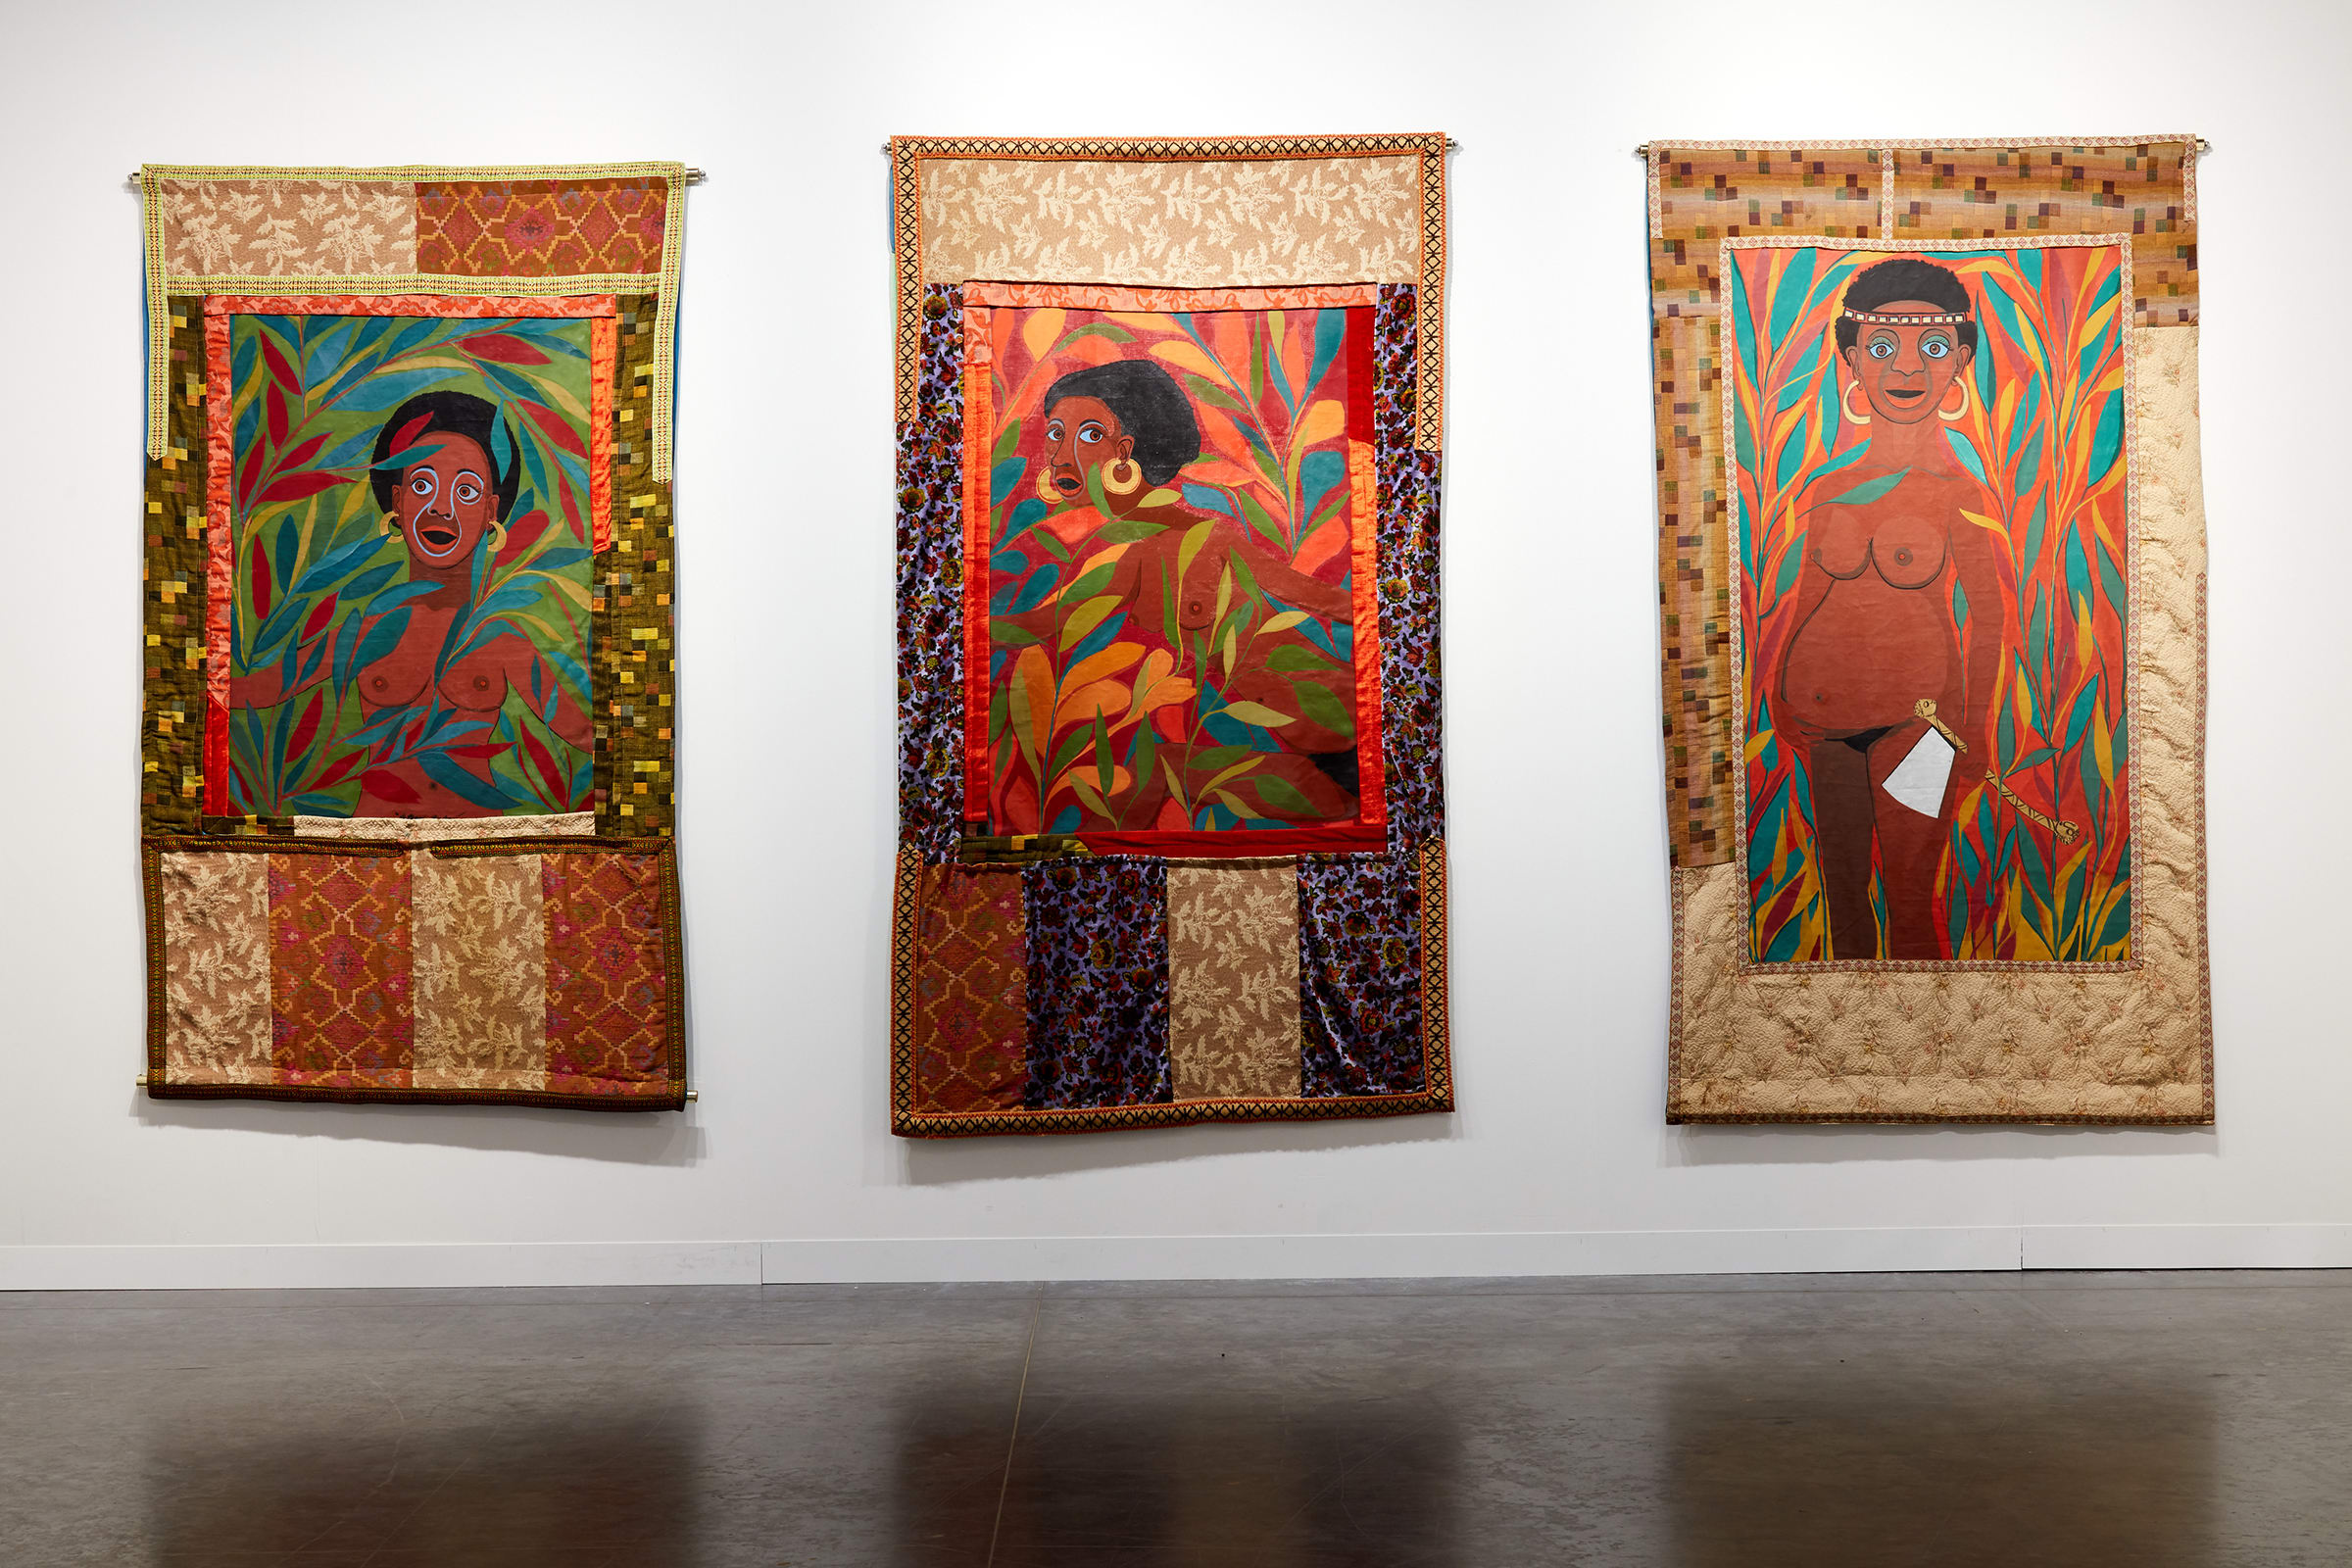 Installation view of work by Faith Ringgold presented by Pippy Houldsworth Gallery at Art Basel Miami Beach 2019.